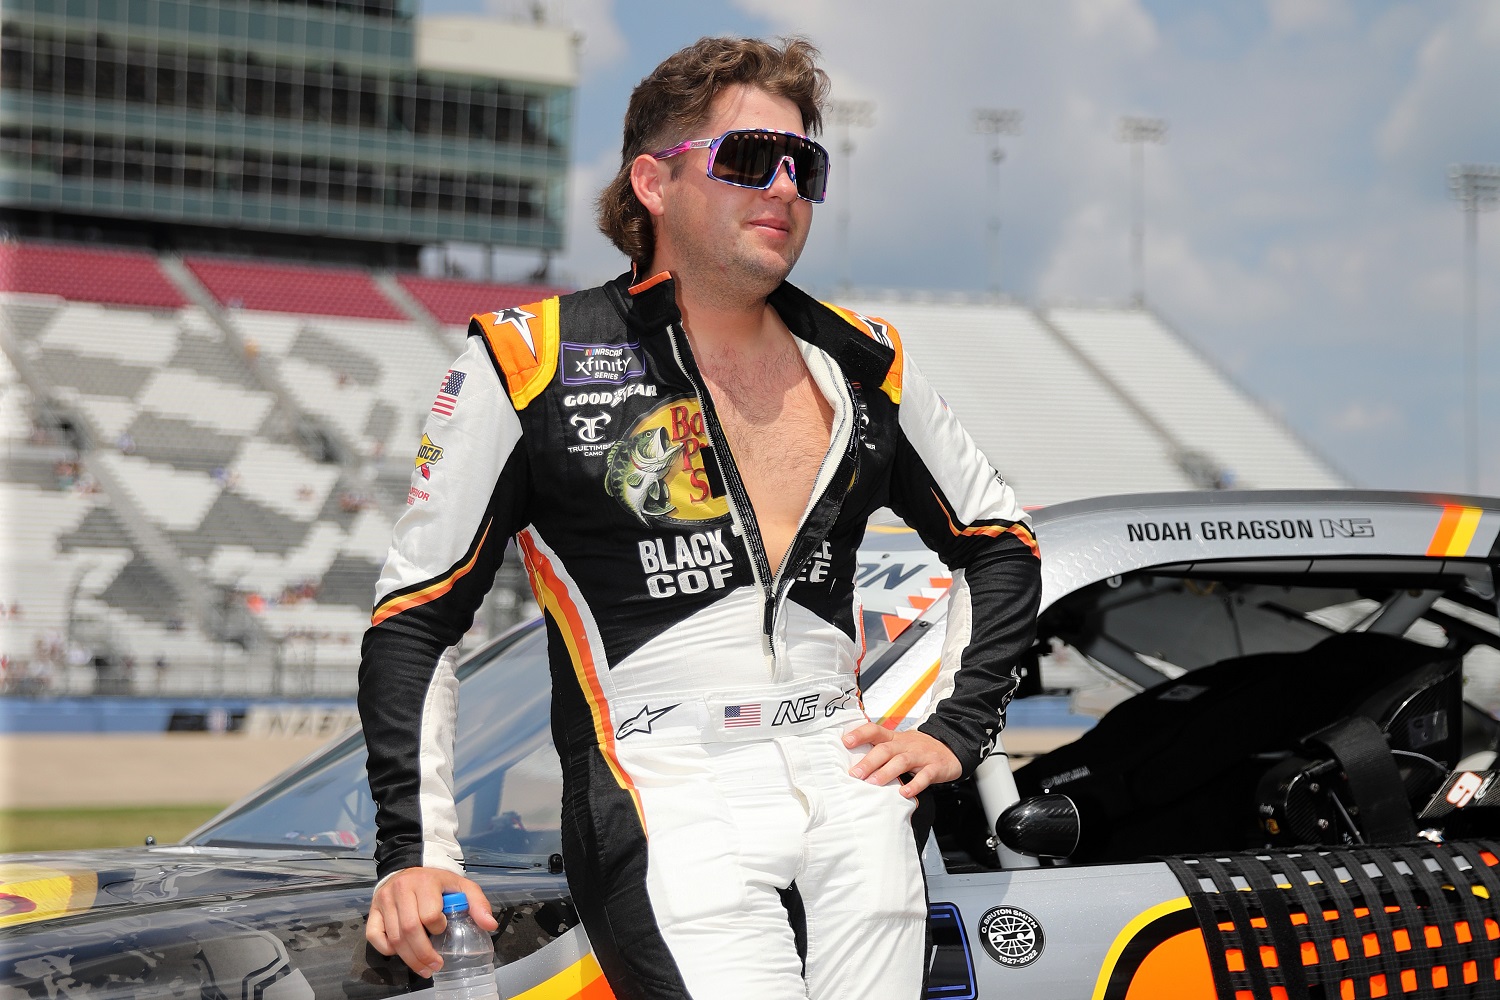 Noah Gragson waits on the grid during qualifying for the NASCAR Xfinity Series Tennessee Lottery 250 at Nashville Superspeedway on June 25, 2022.